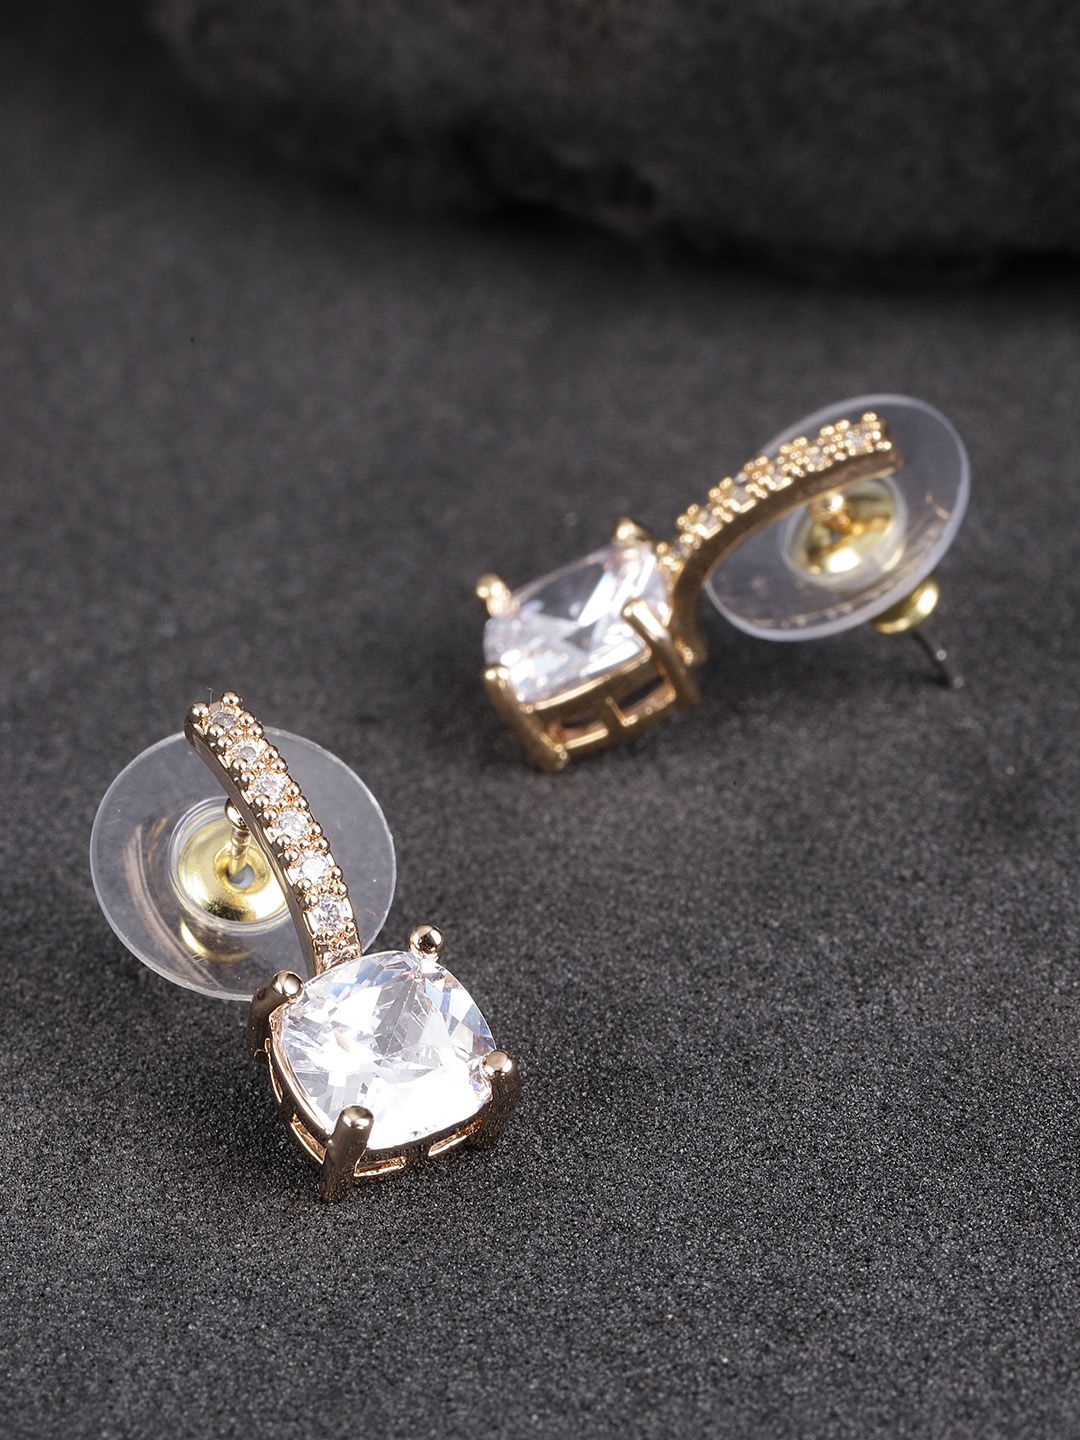 Carlton London Gold-Plated & Silver-Toned CZ-Studded  Square Drop Earrings Price in India